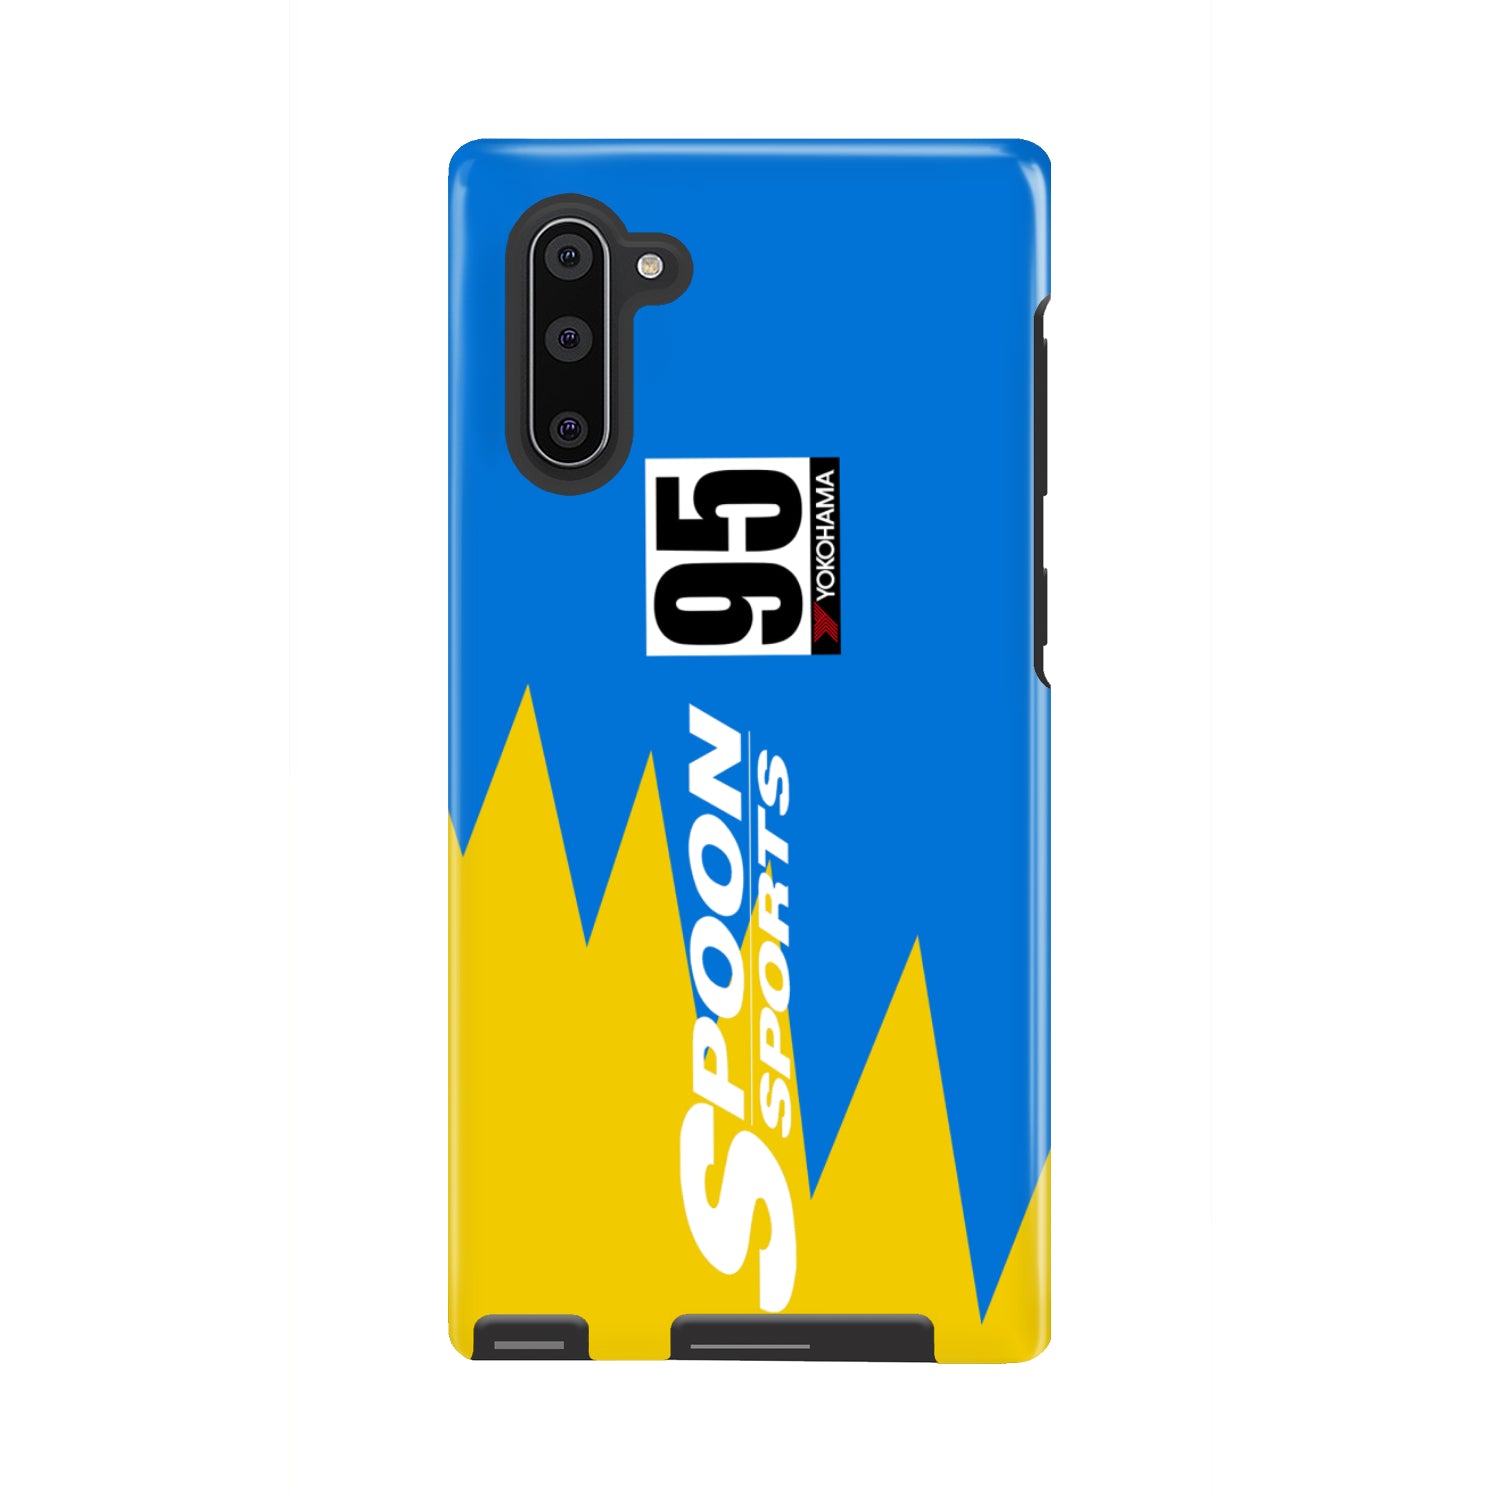 Spoon Livery Phone Case